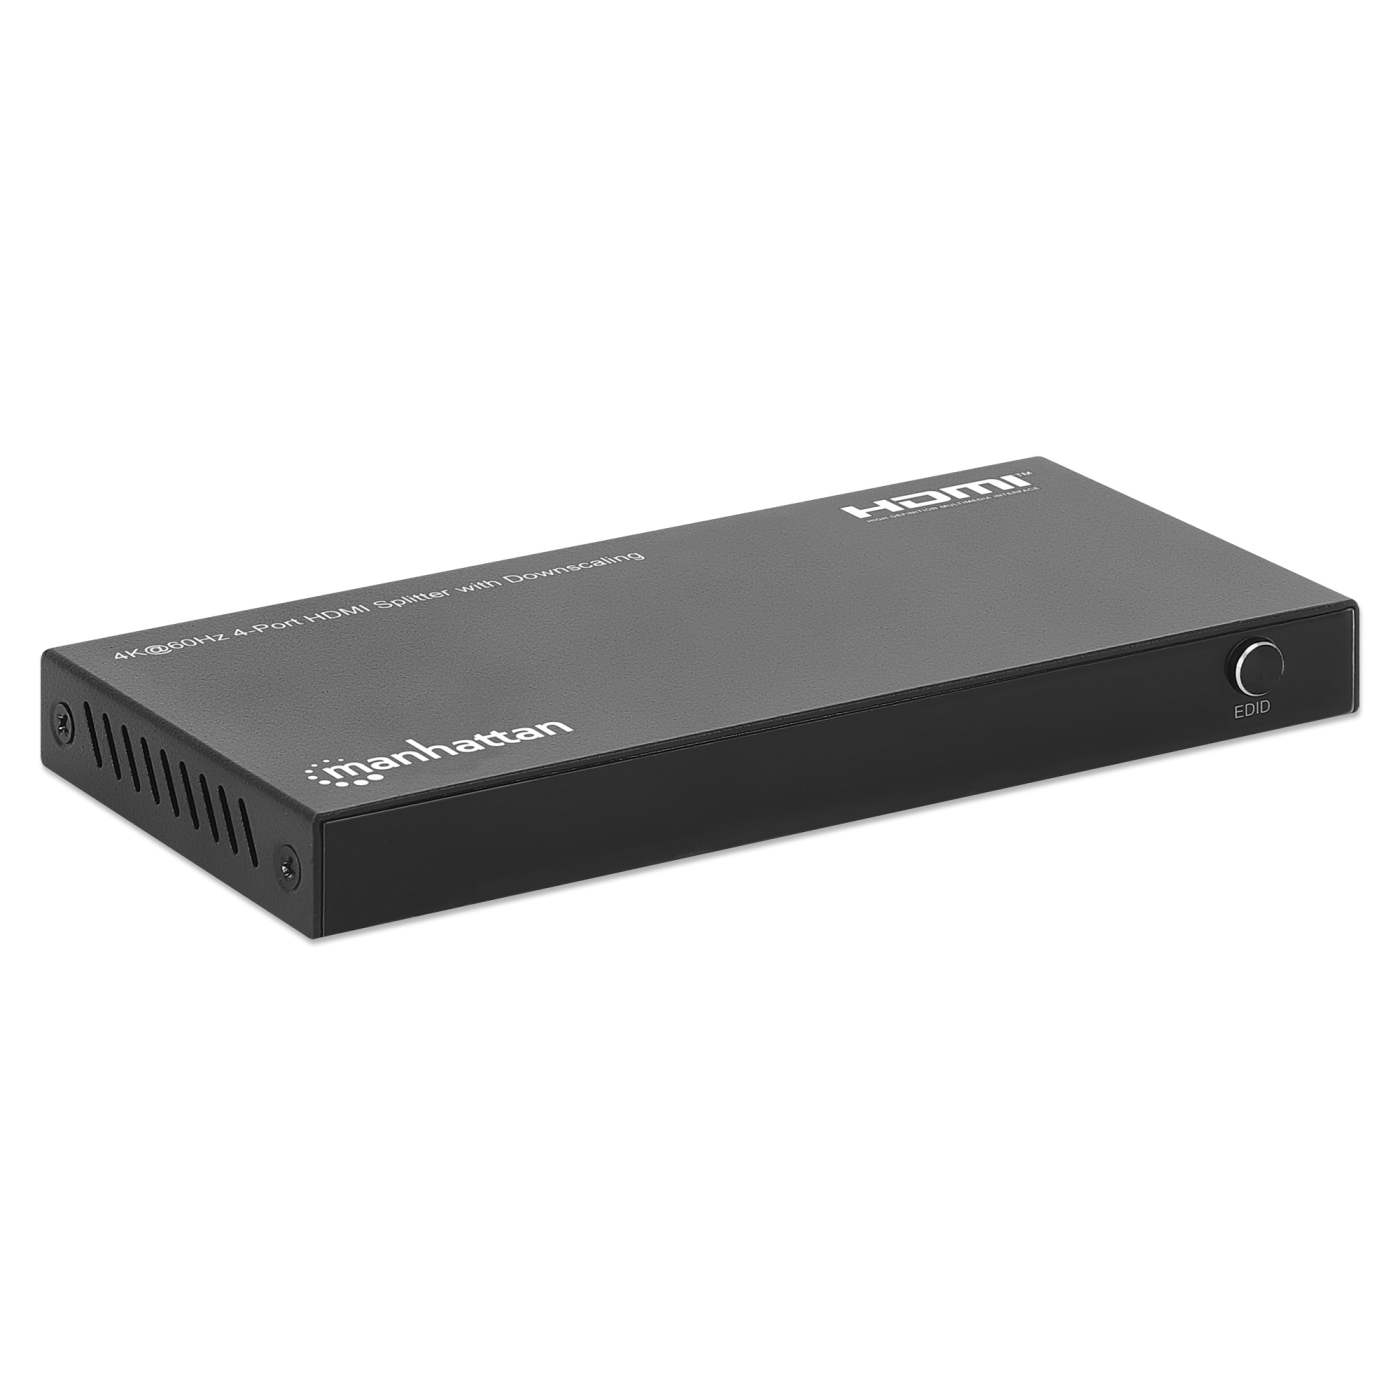 4K@60Hz 4-Port HDMI Splitter with Downscaling Image 2